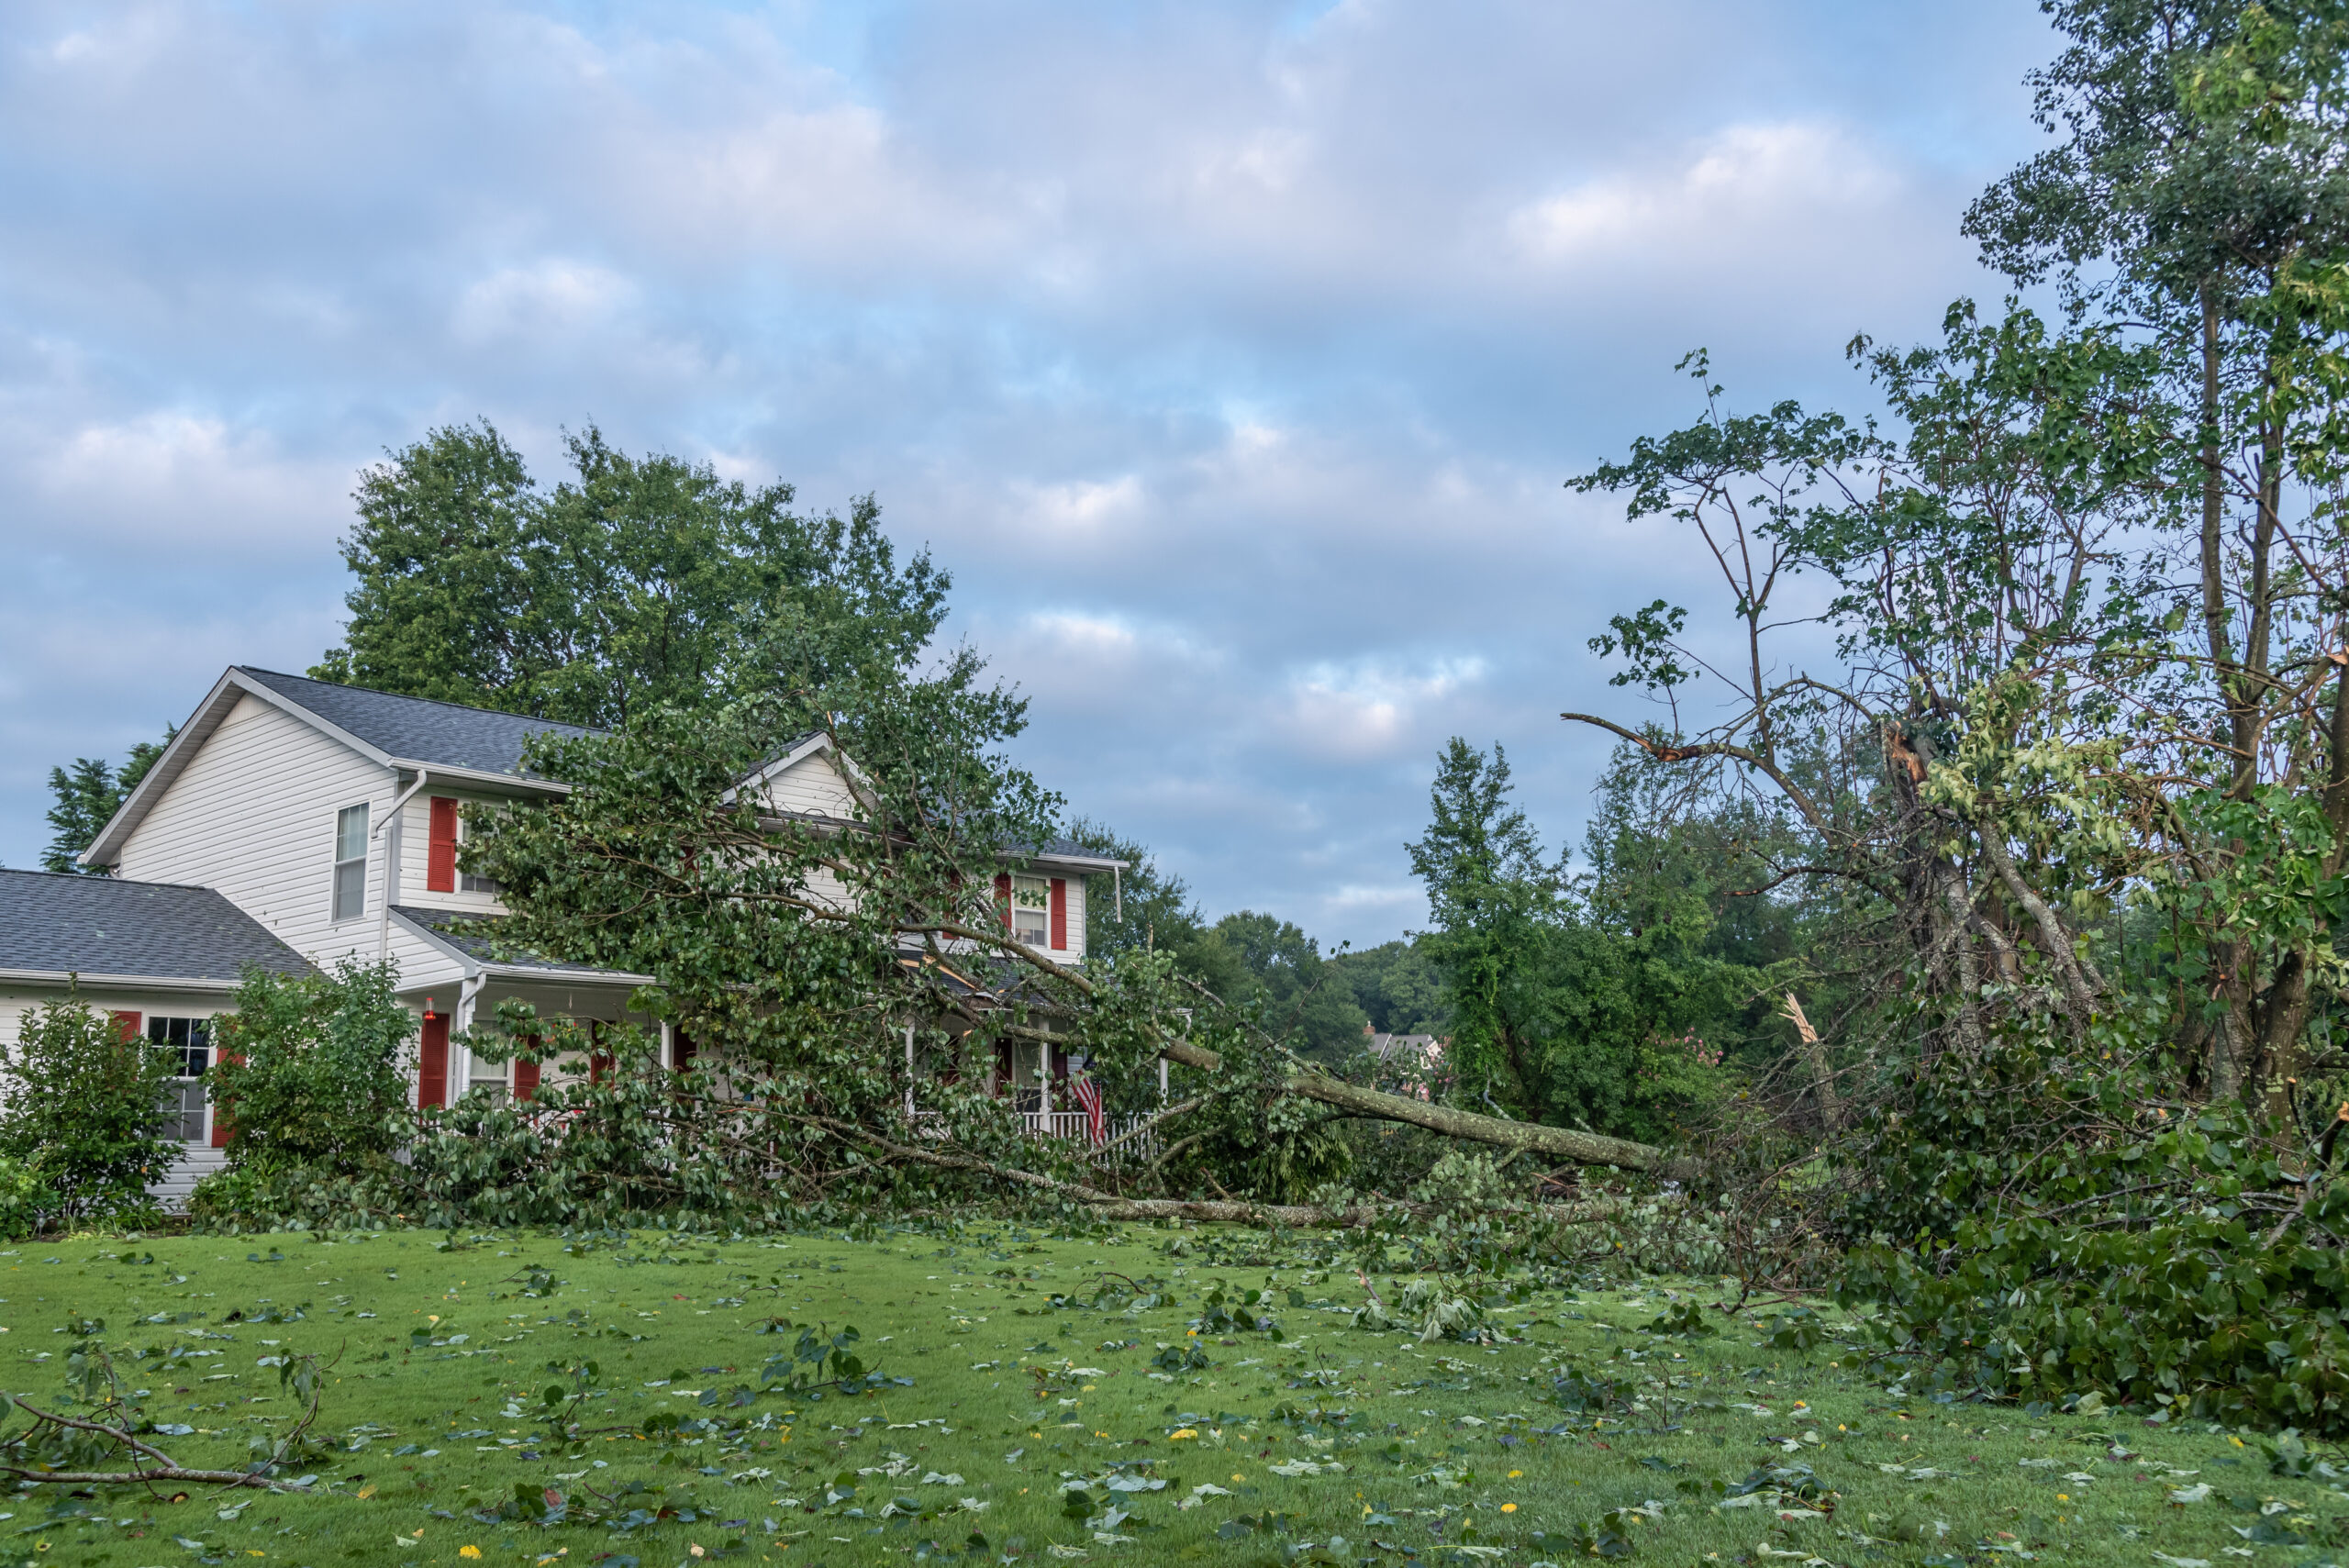 Image of a tree fallen on a house, illustrating the need for reliable tree services from Northside Tree Professionals